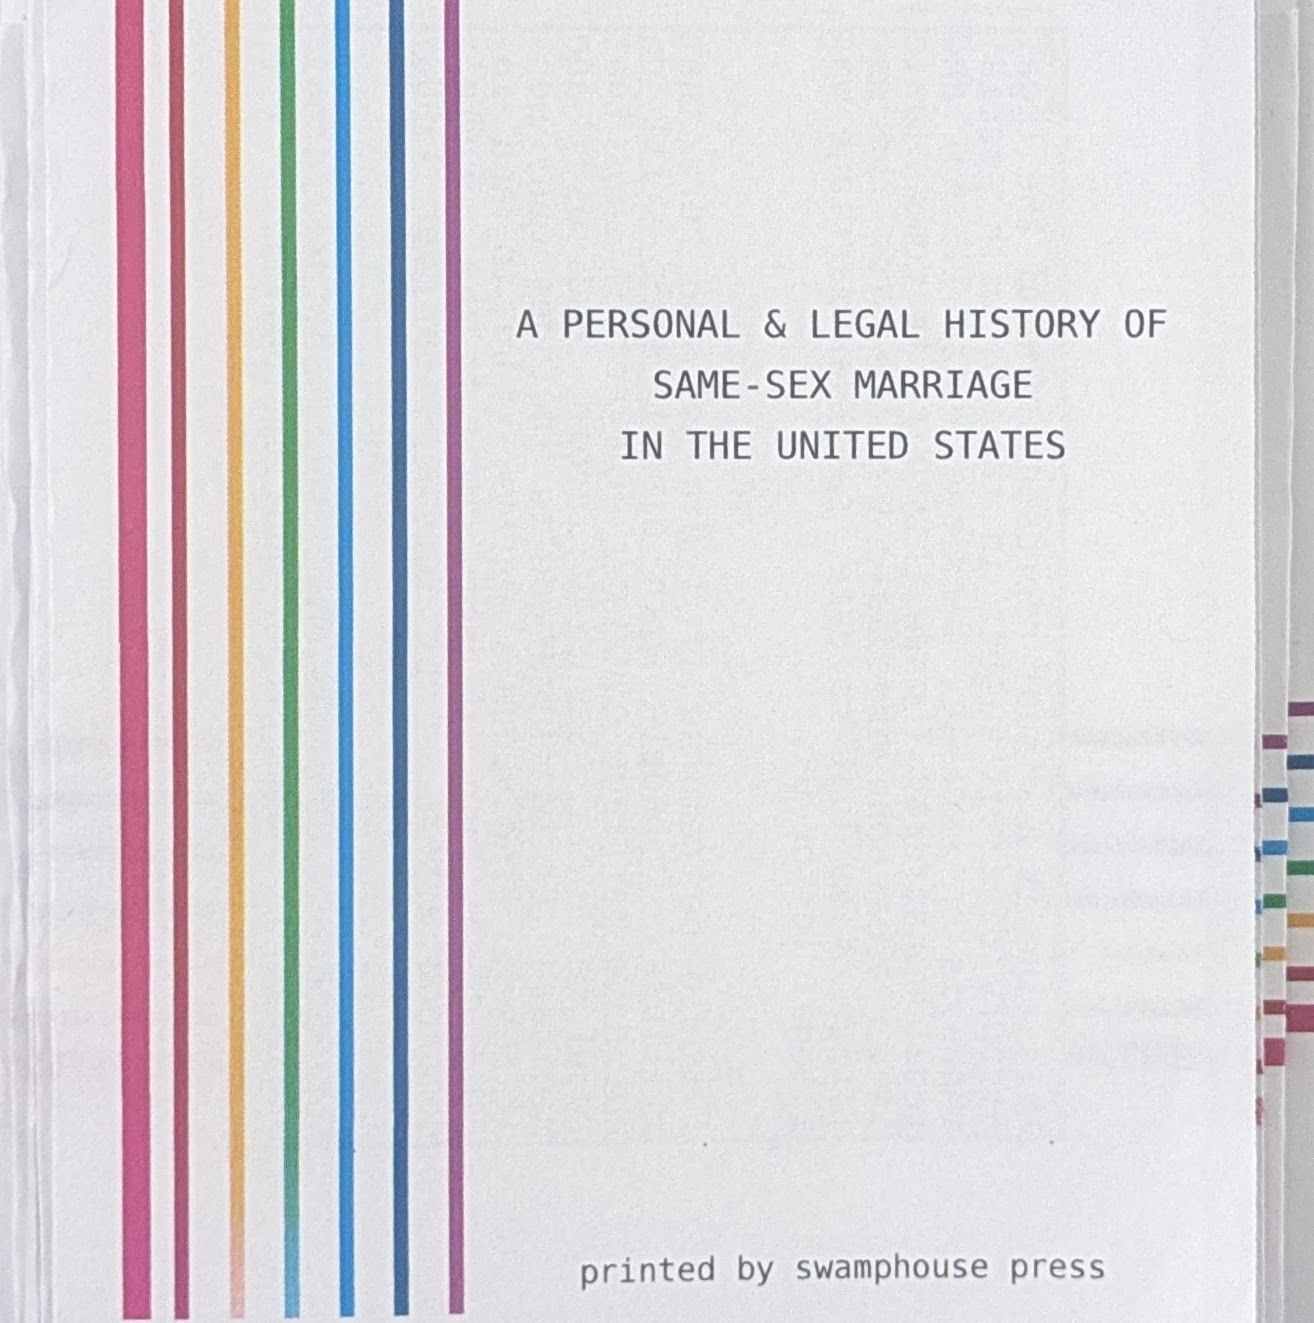 The cover of the zine “A Personal and Legal History of Same Sex Marriage in the United States.” The text of the title is next to a series of rainbow-colored lines.